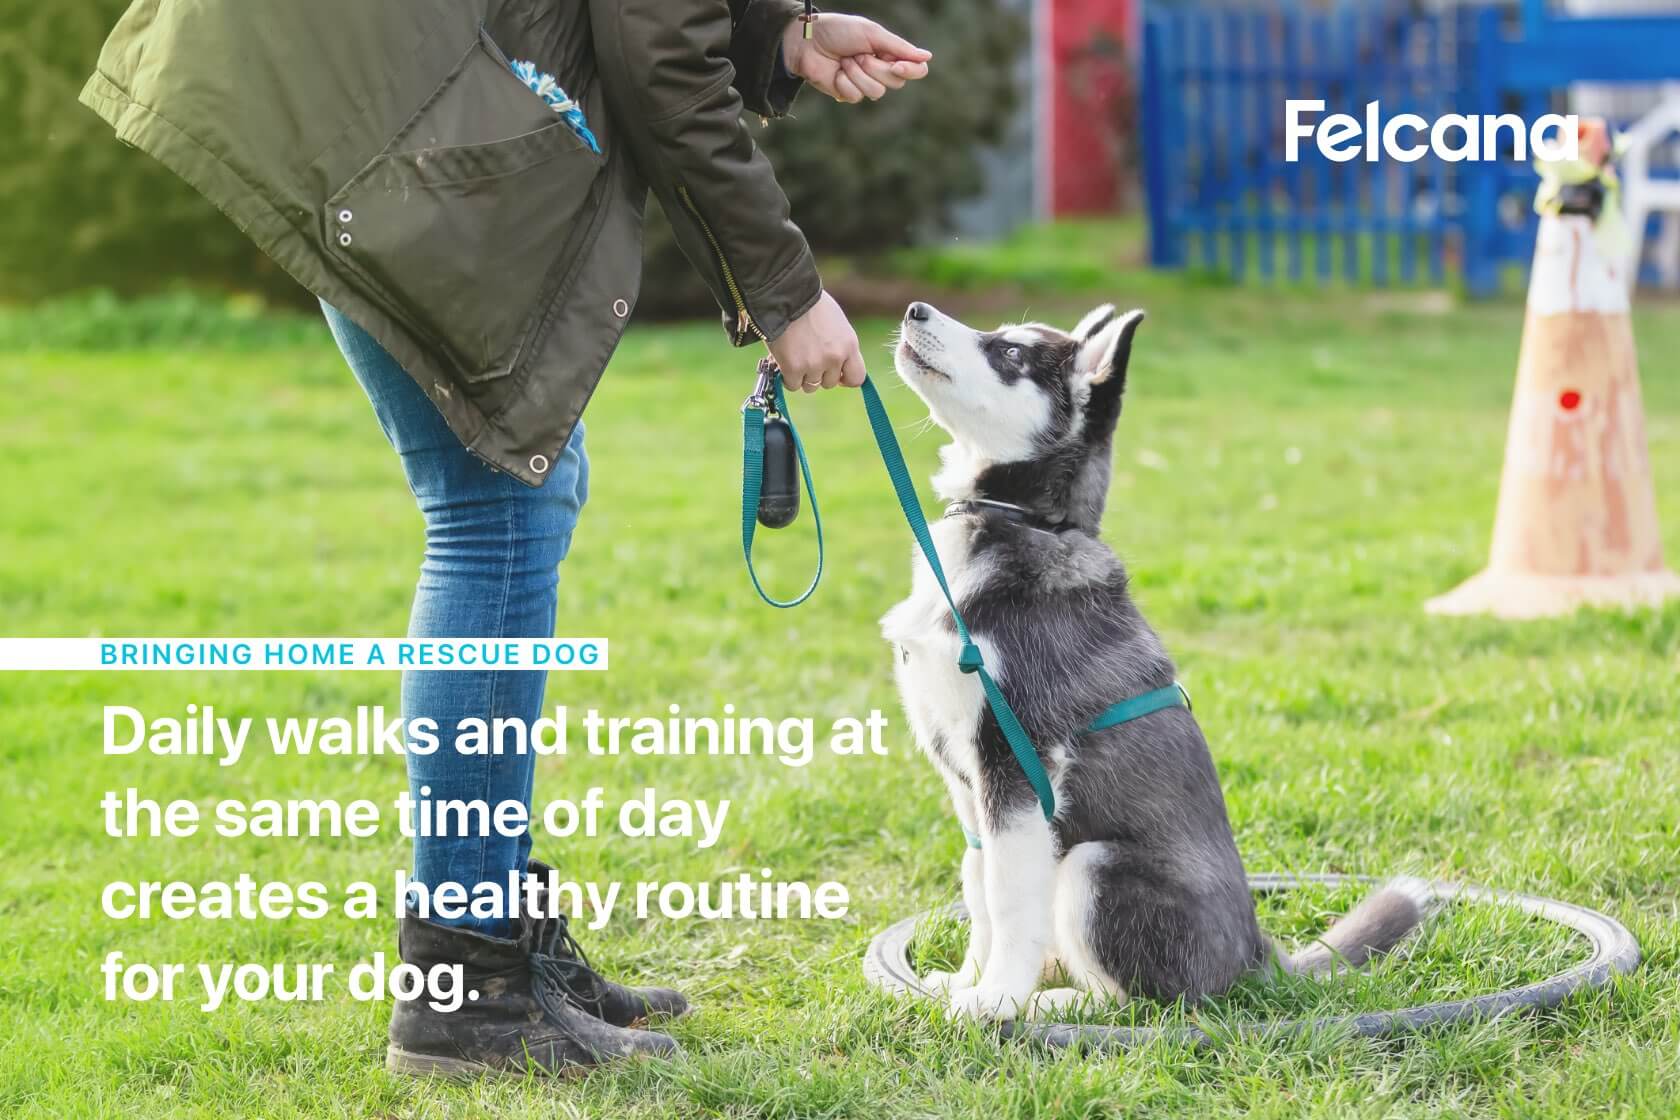 Daily walks and training at the same time of day creates a healthy routine for your dog